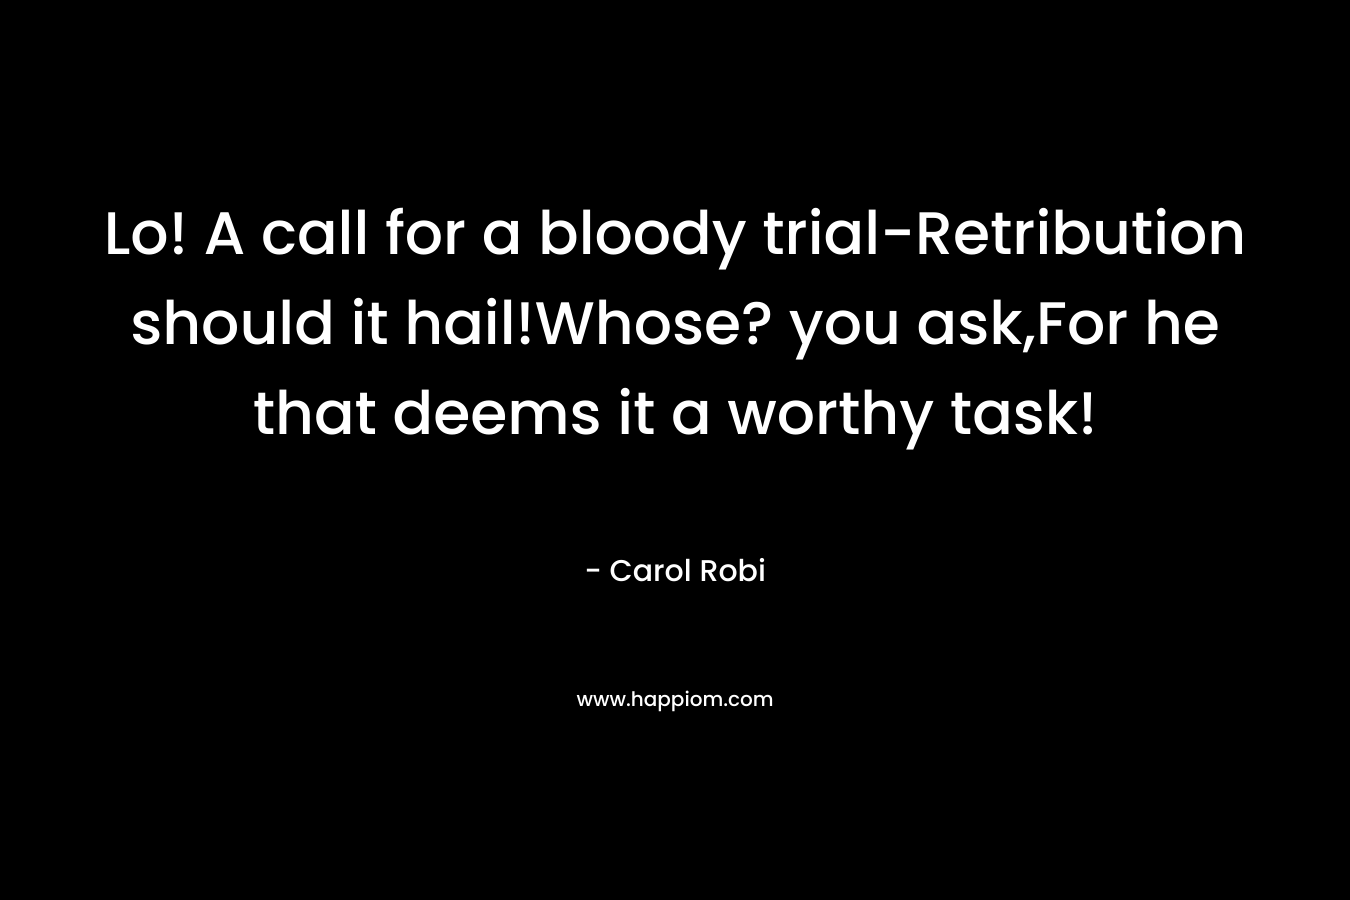 Lo! A call for a bloody trial-Retribution should it hail!Whose? you ask,For he that deems it a worthy task! – Carol Robi